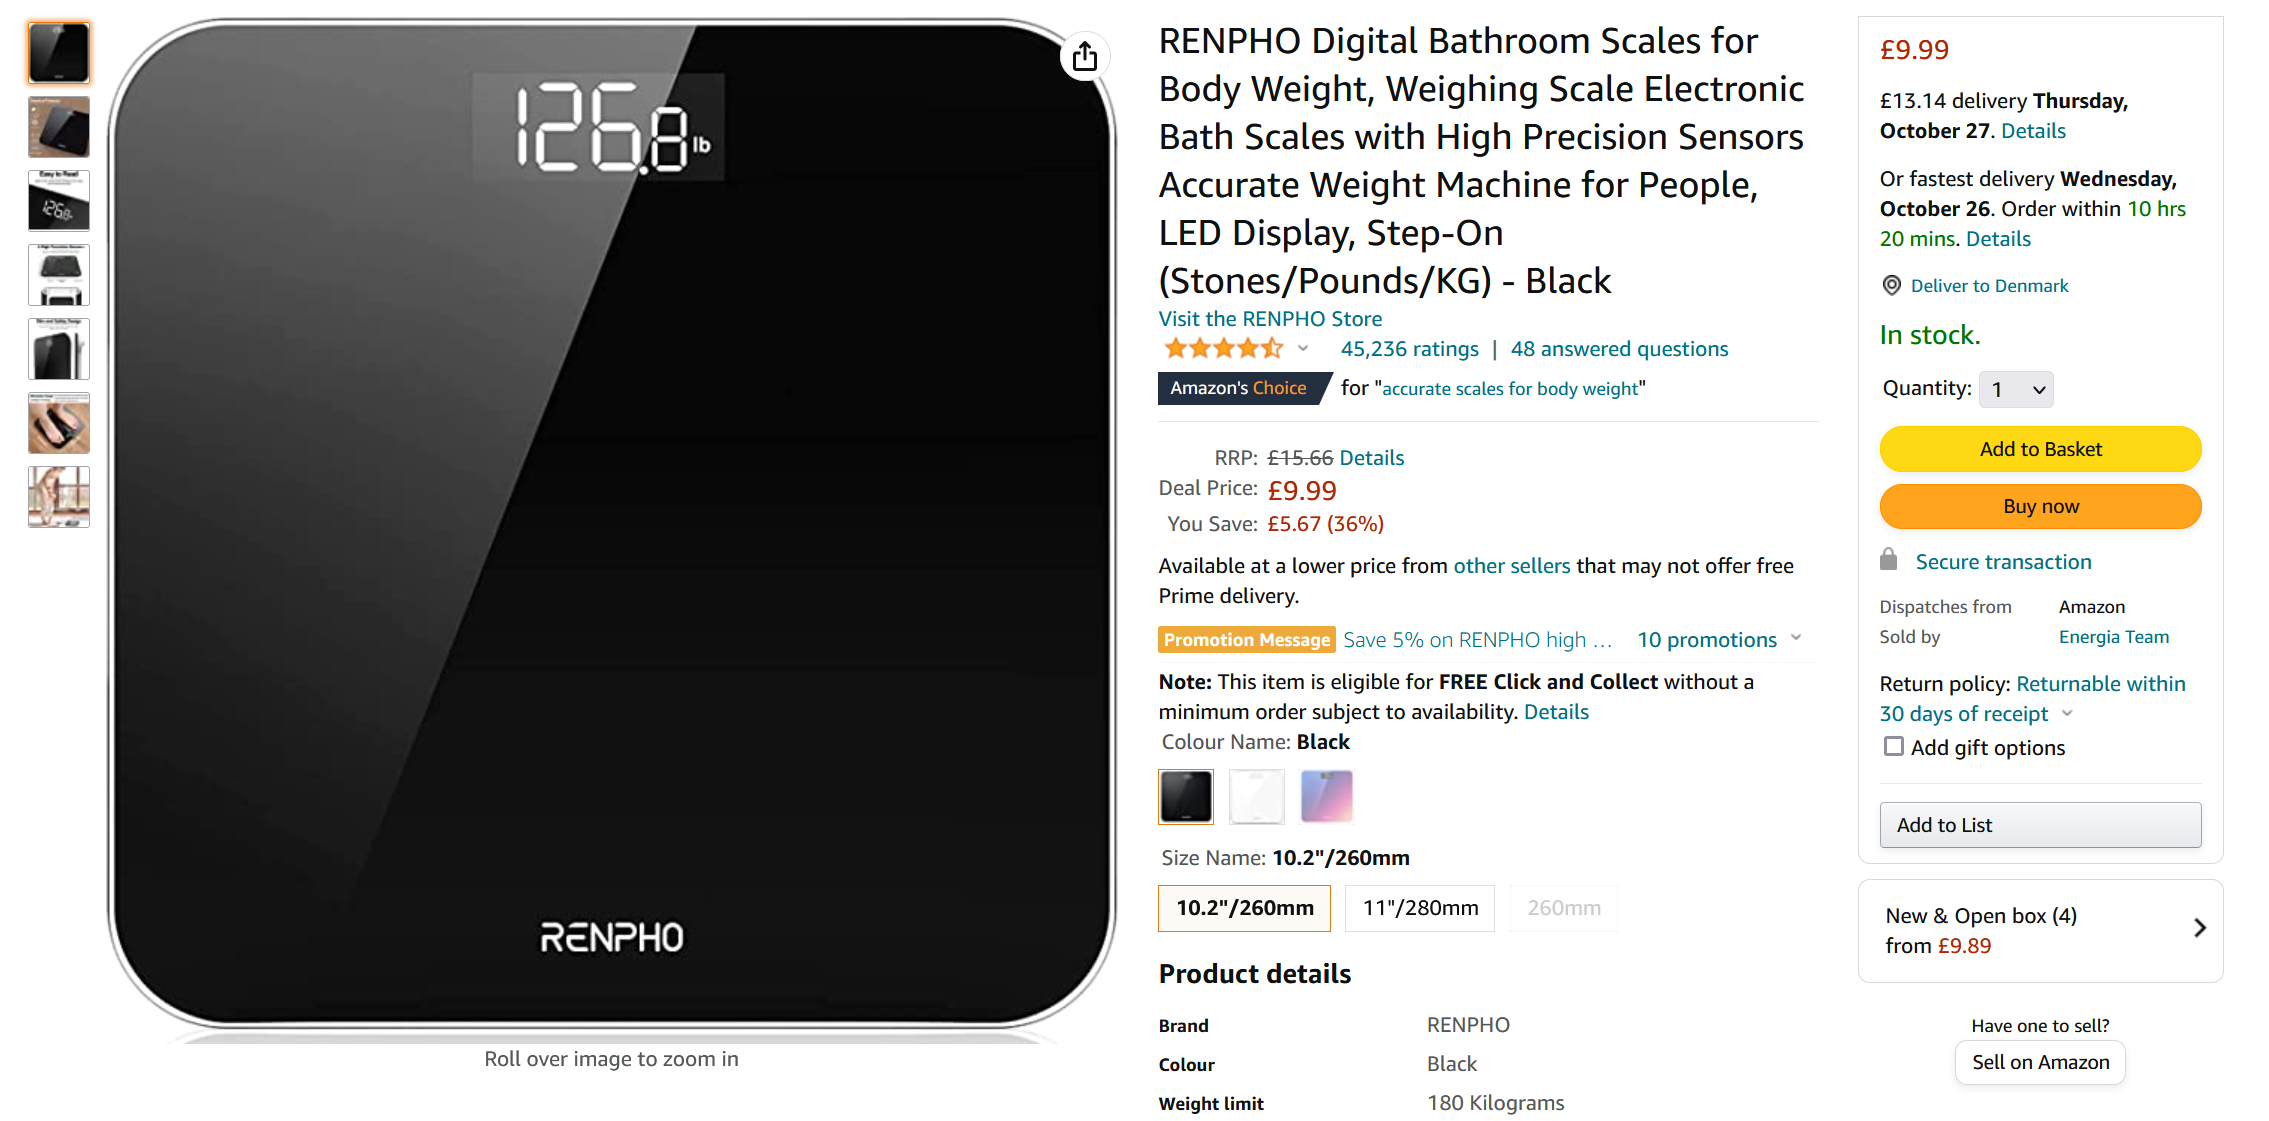 Amazon.com's product card on a sleek weighing scale.